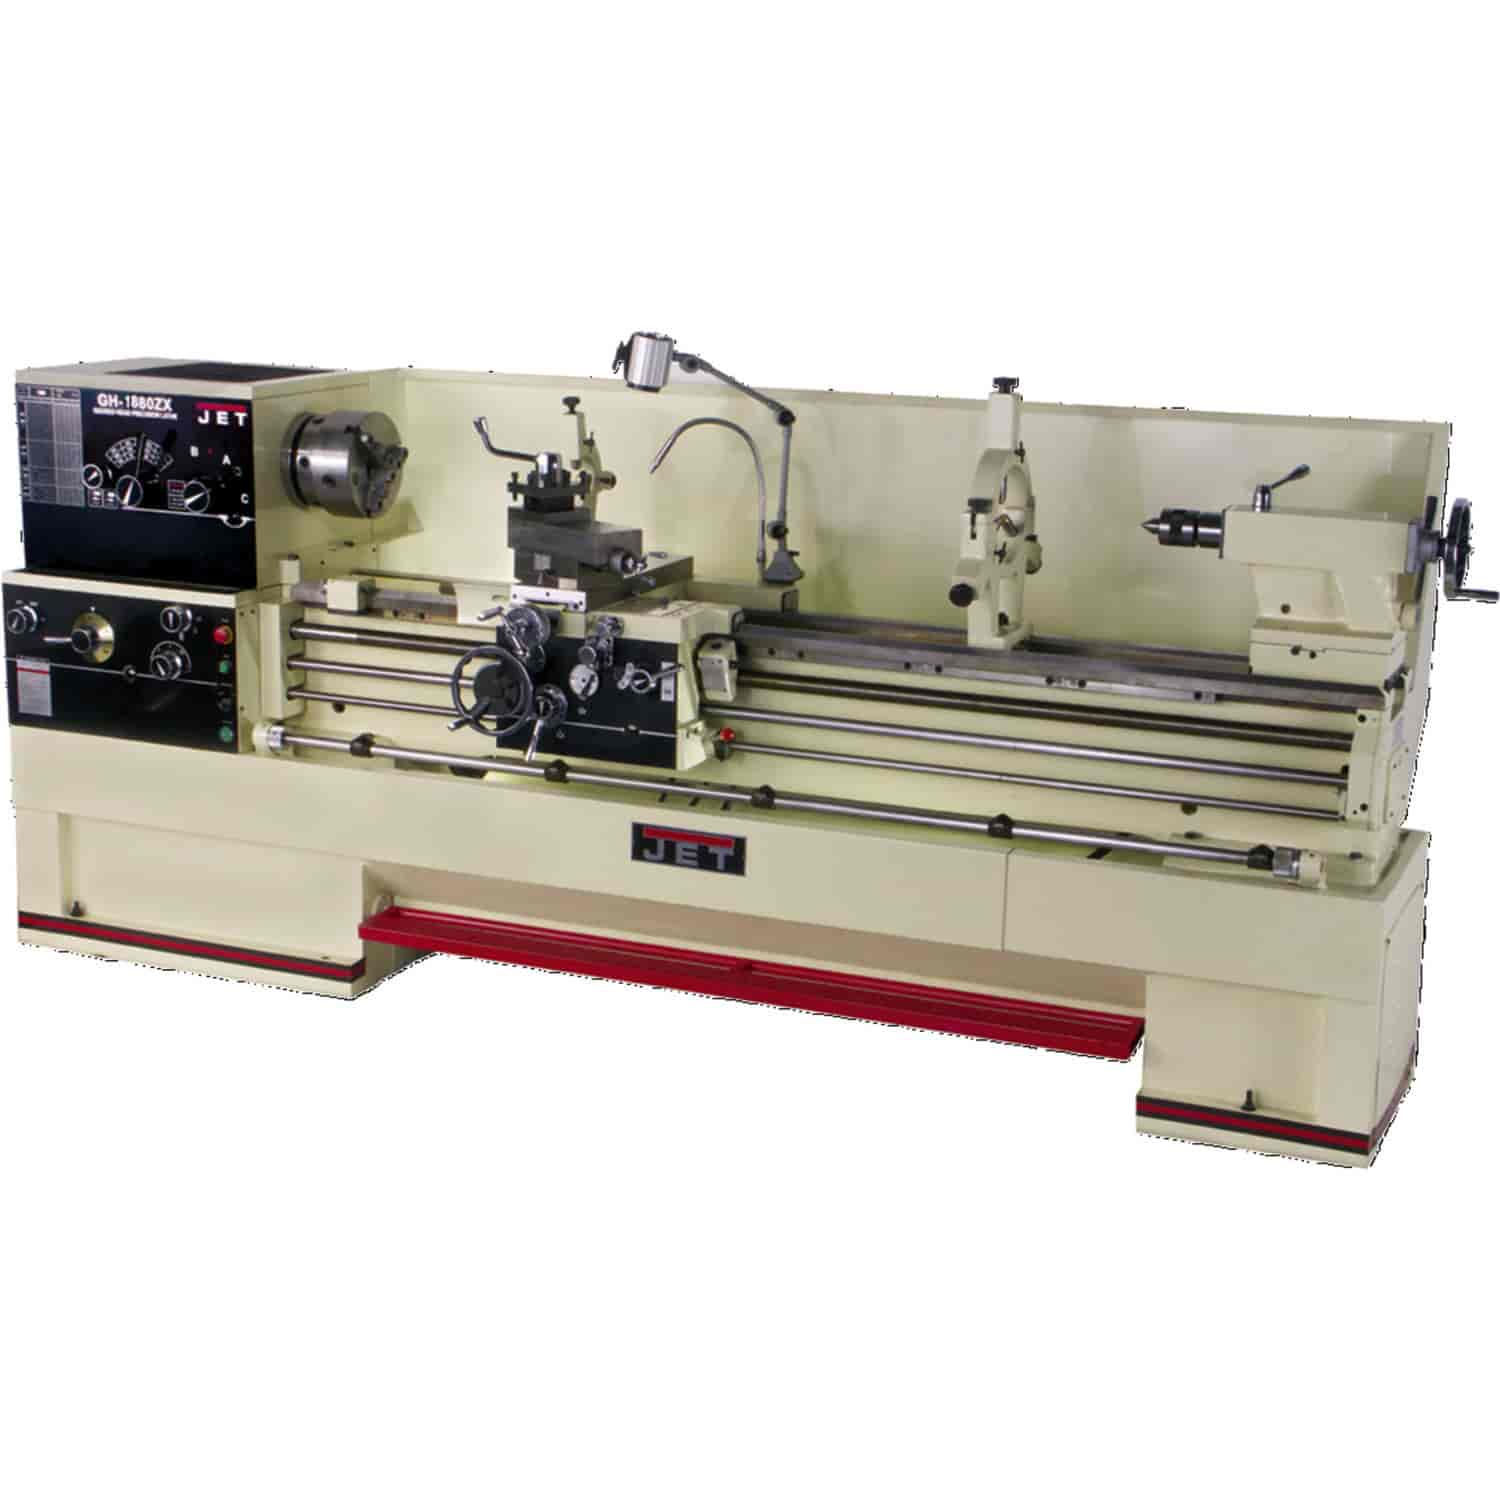 GH-1880ZX 3-1/8 Spindle Bore Geared Head Lathe